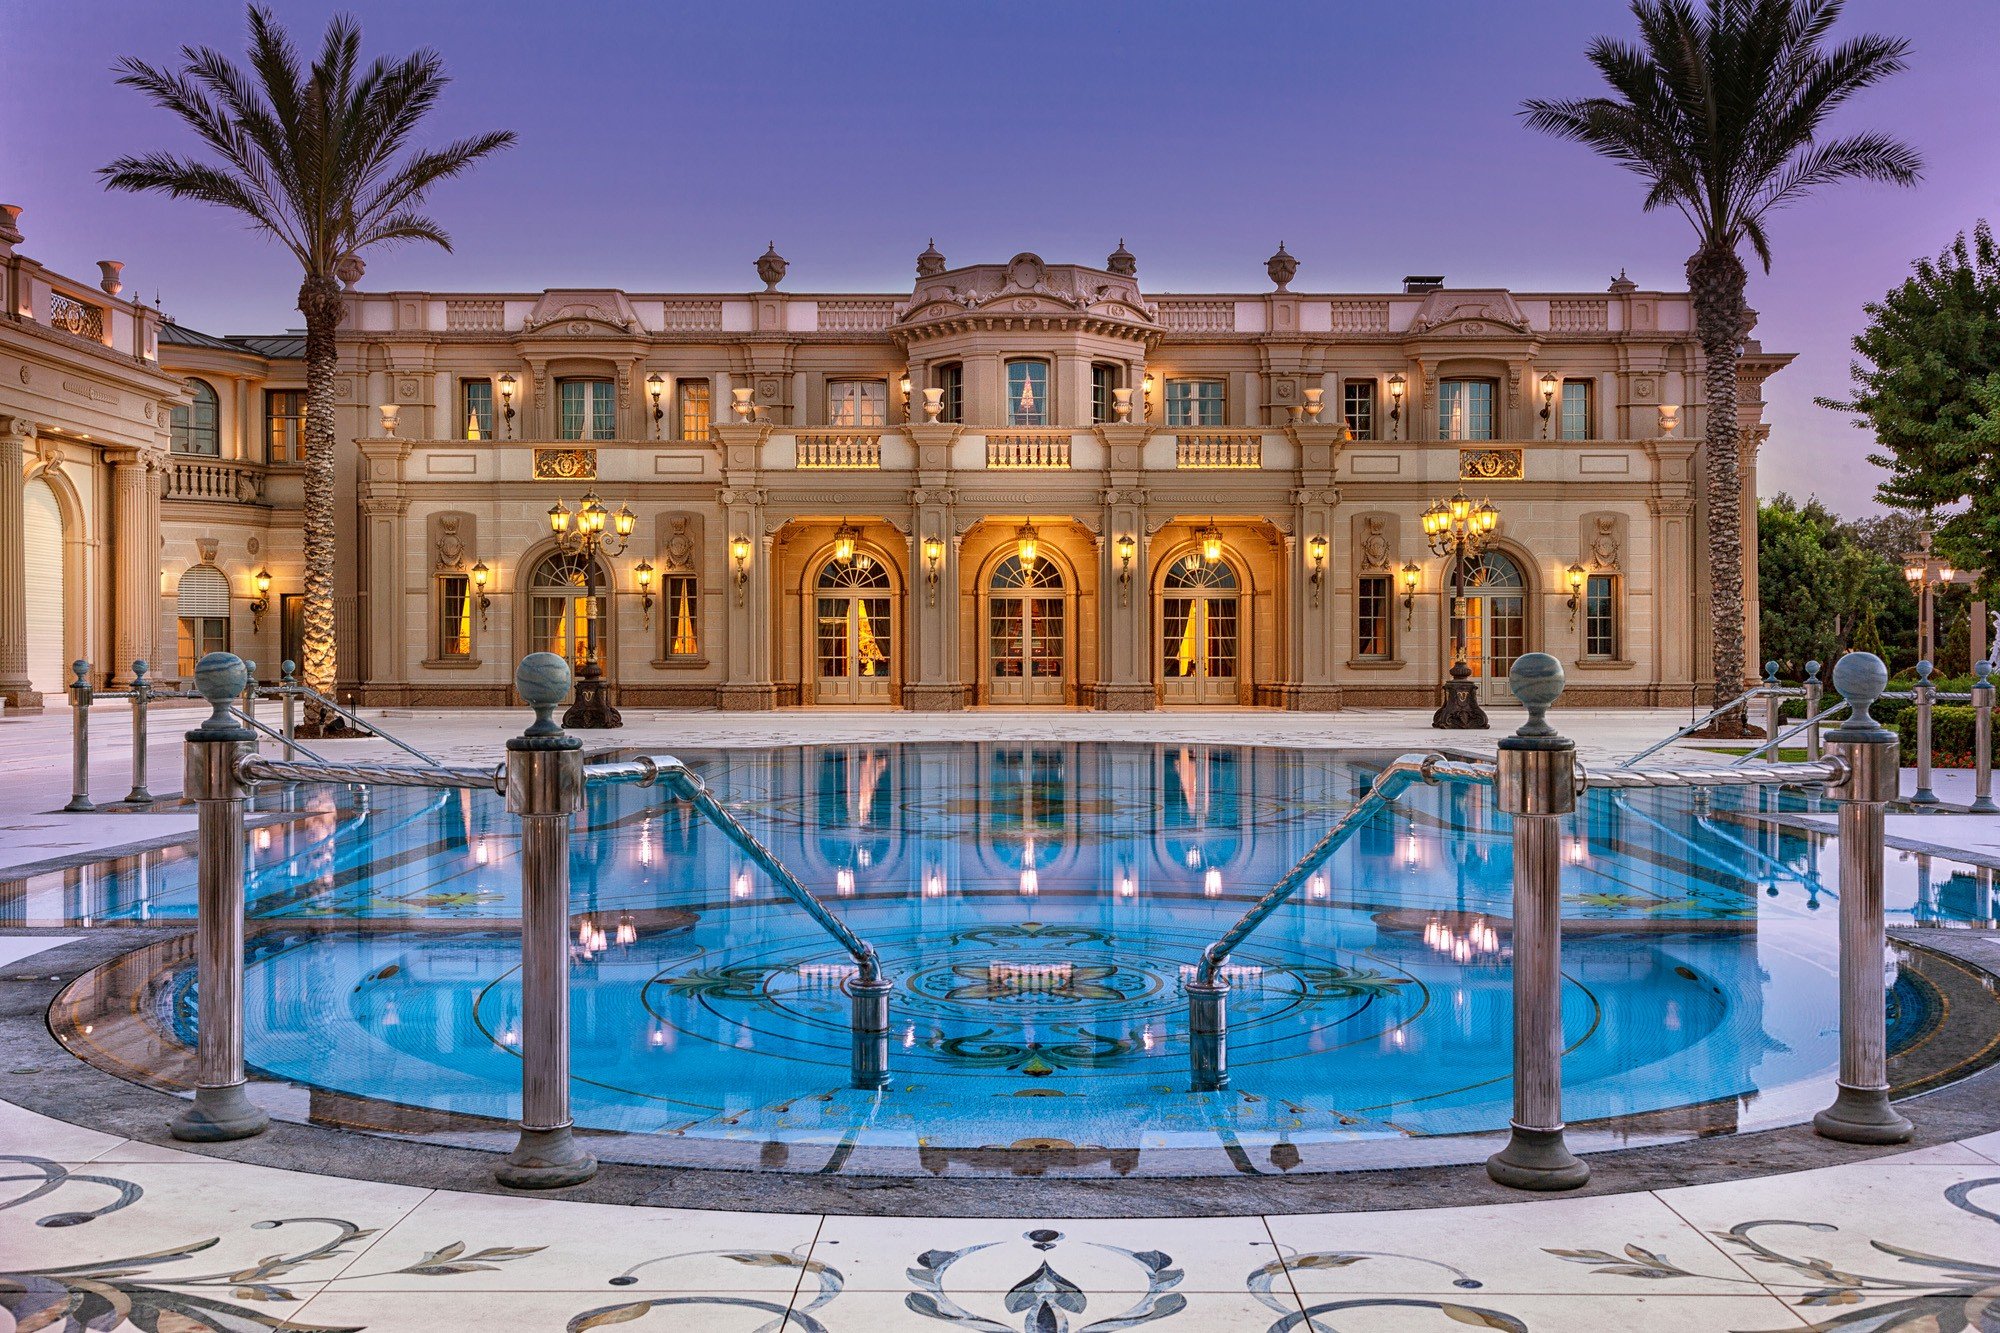 The 10 Best Mansions in the World: Coolest Estates You Can Actually Buy